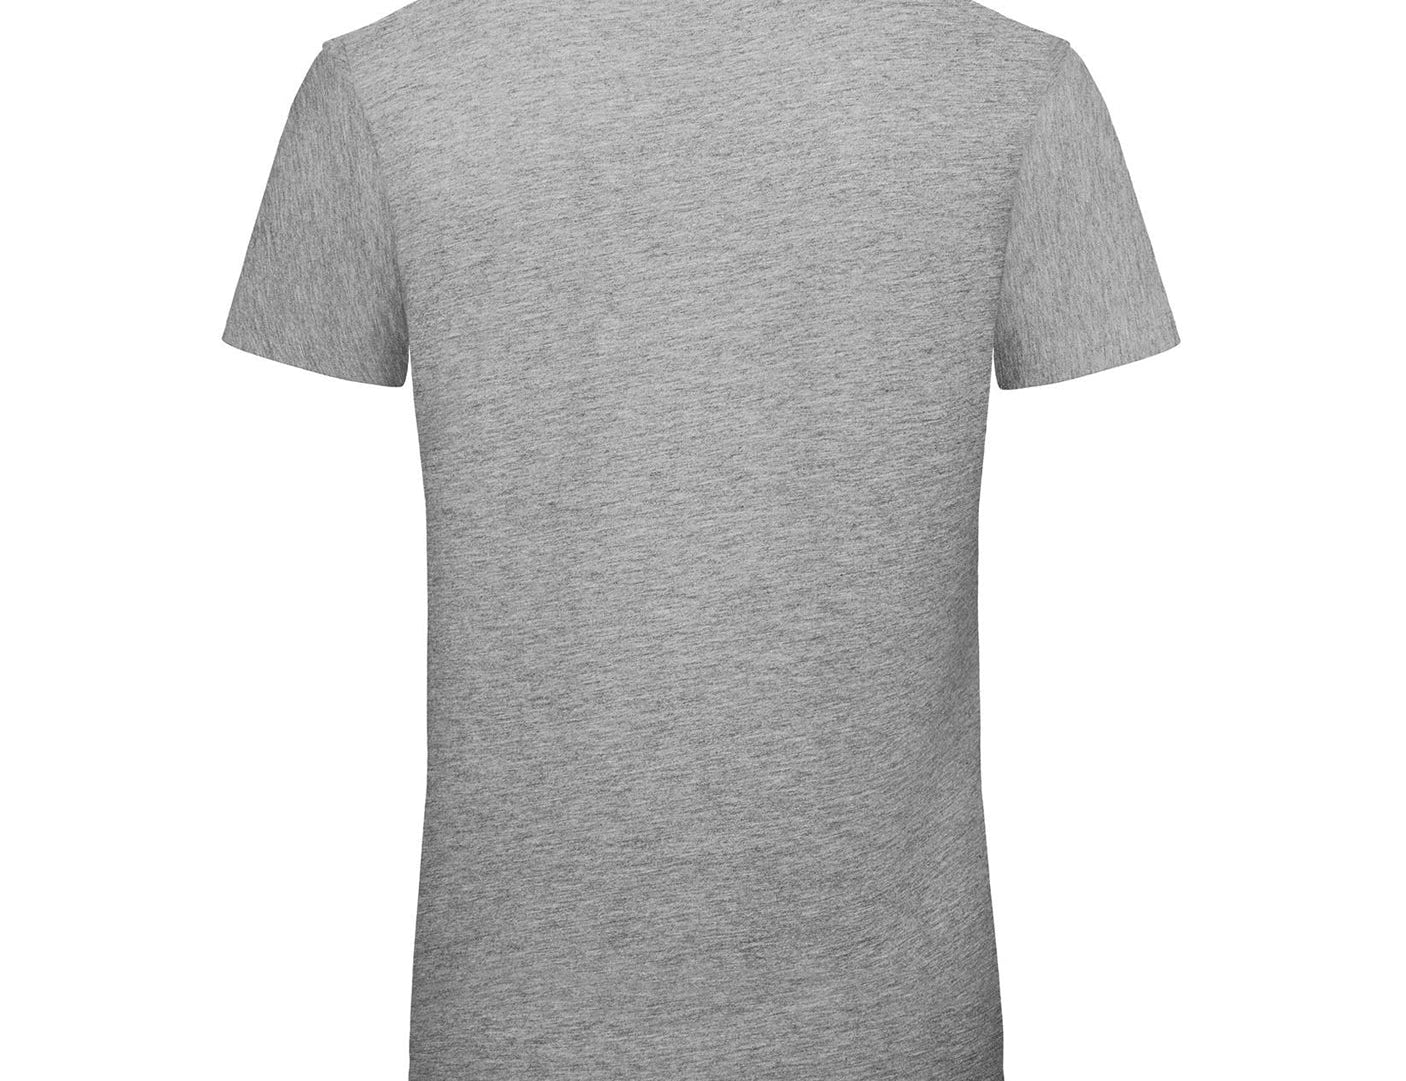 – Grey ONETURTLE Heather T-shirt in